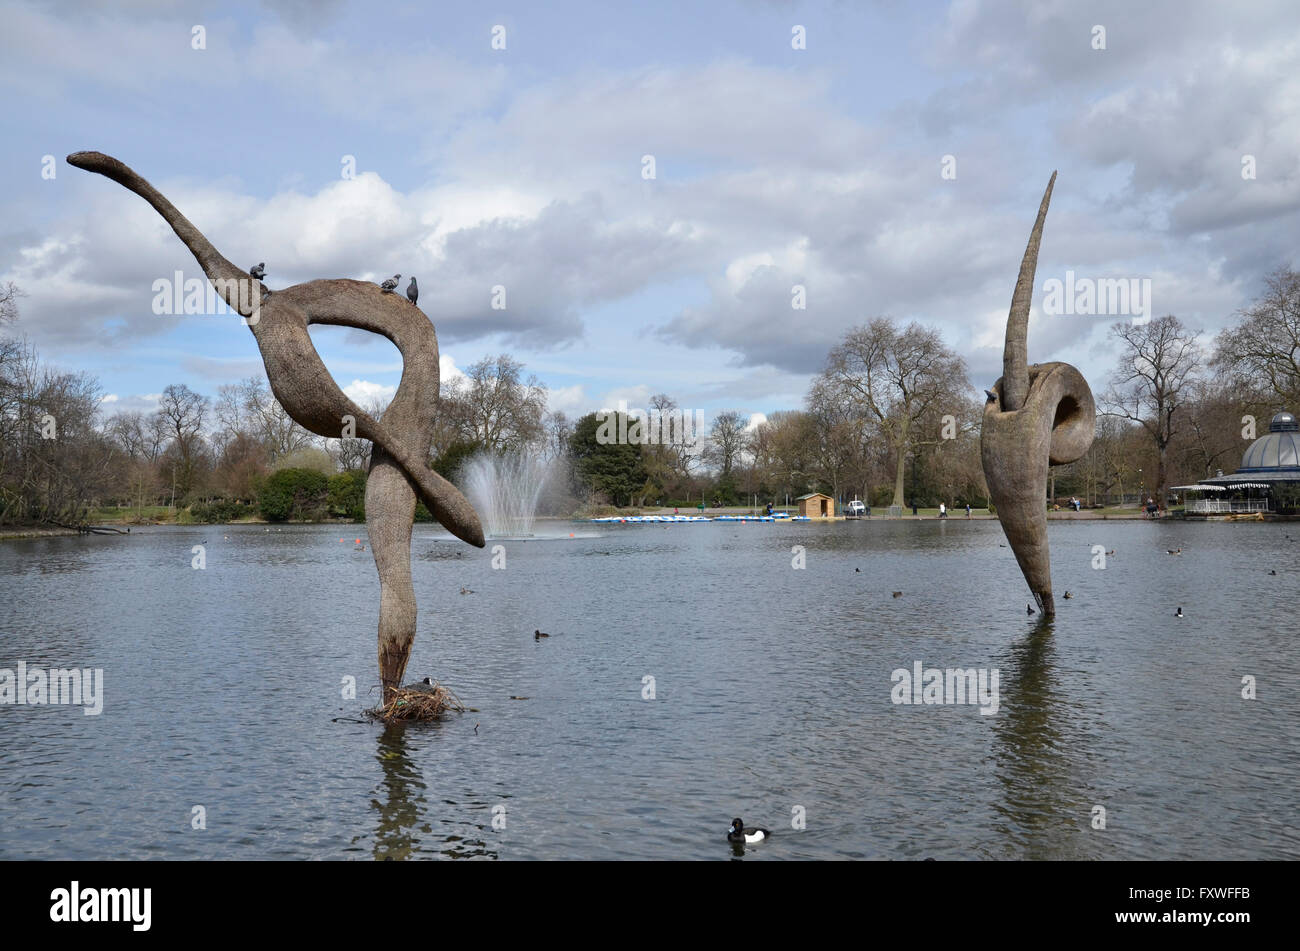 Sculptures in the lake in Victoria Park, Hackney, London Stock Photo